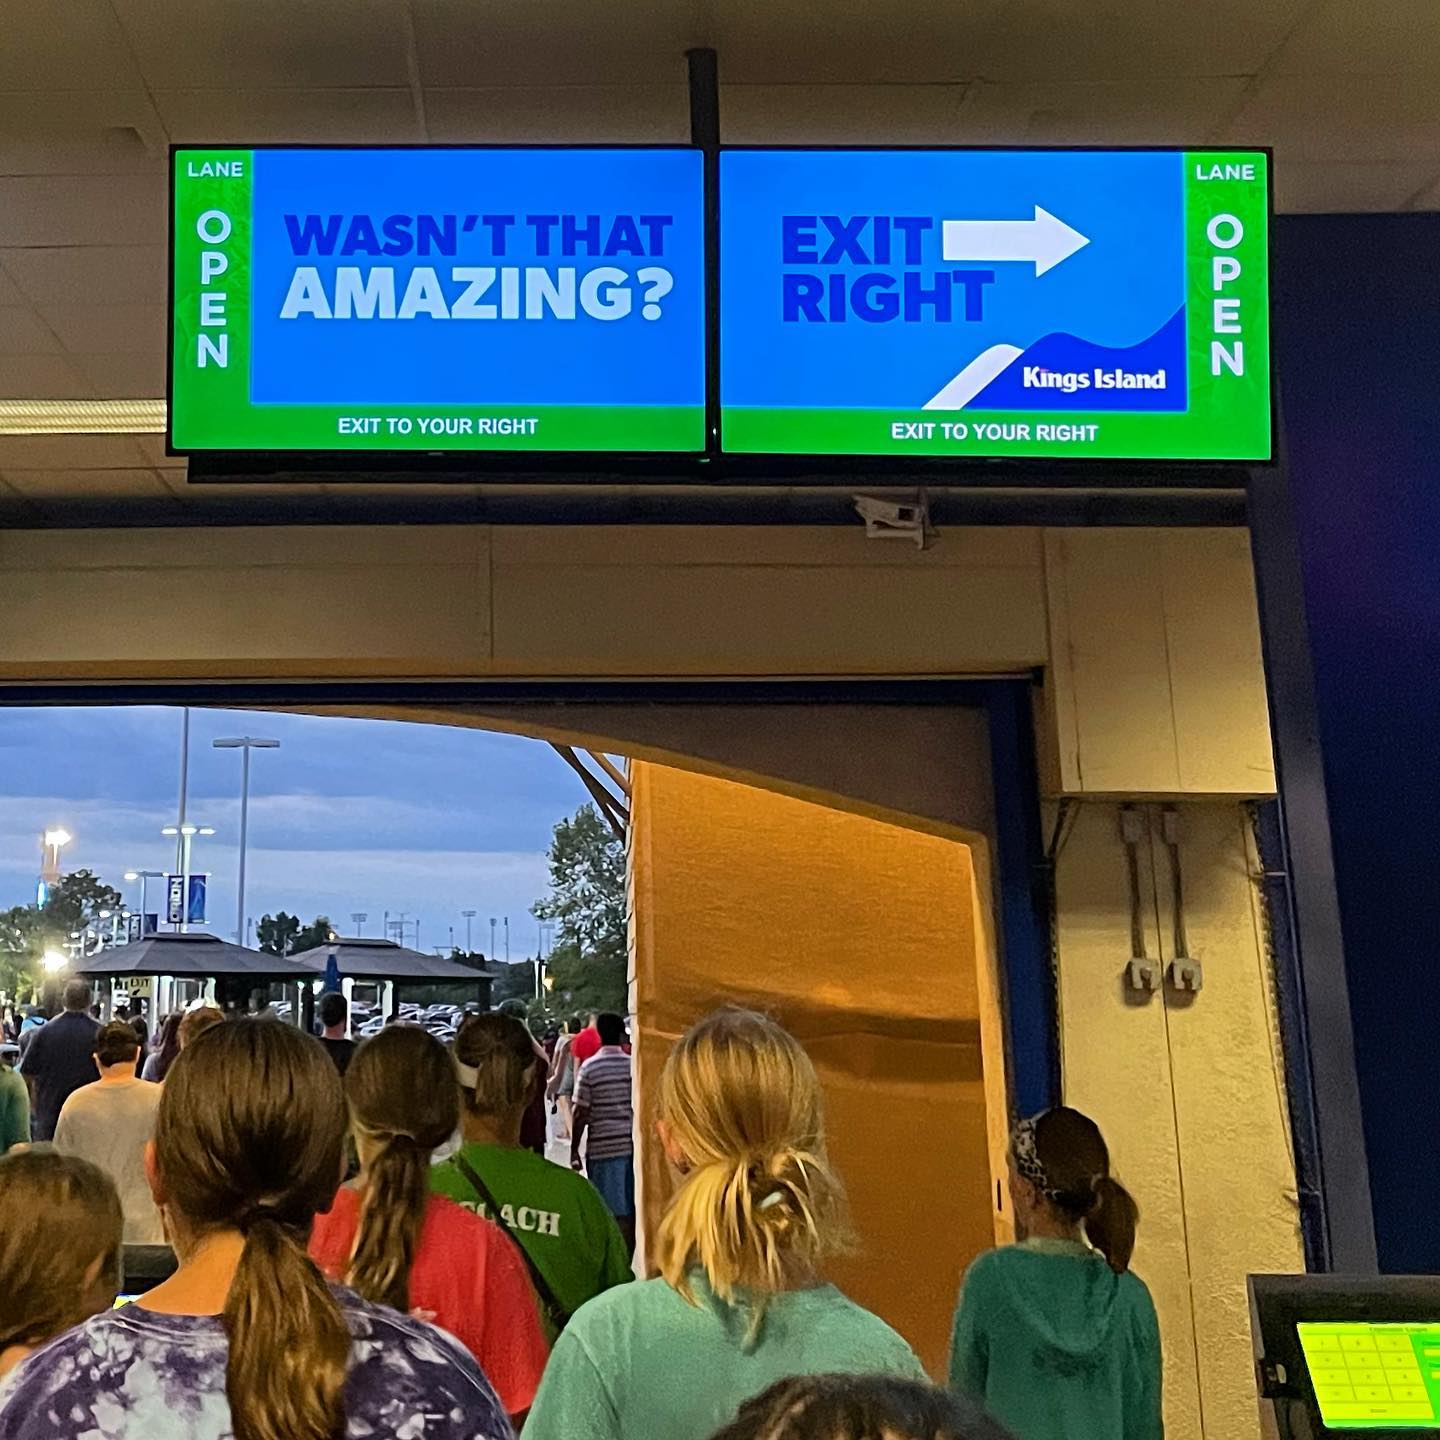 All day today at employees asked “wasn’t that amazing?” after rides. And here it is when leaving the park. Nice experience design, @kingsislandpr